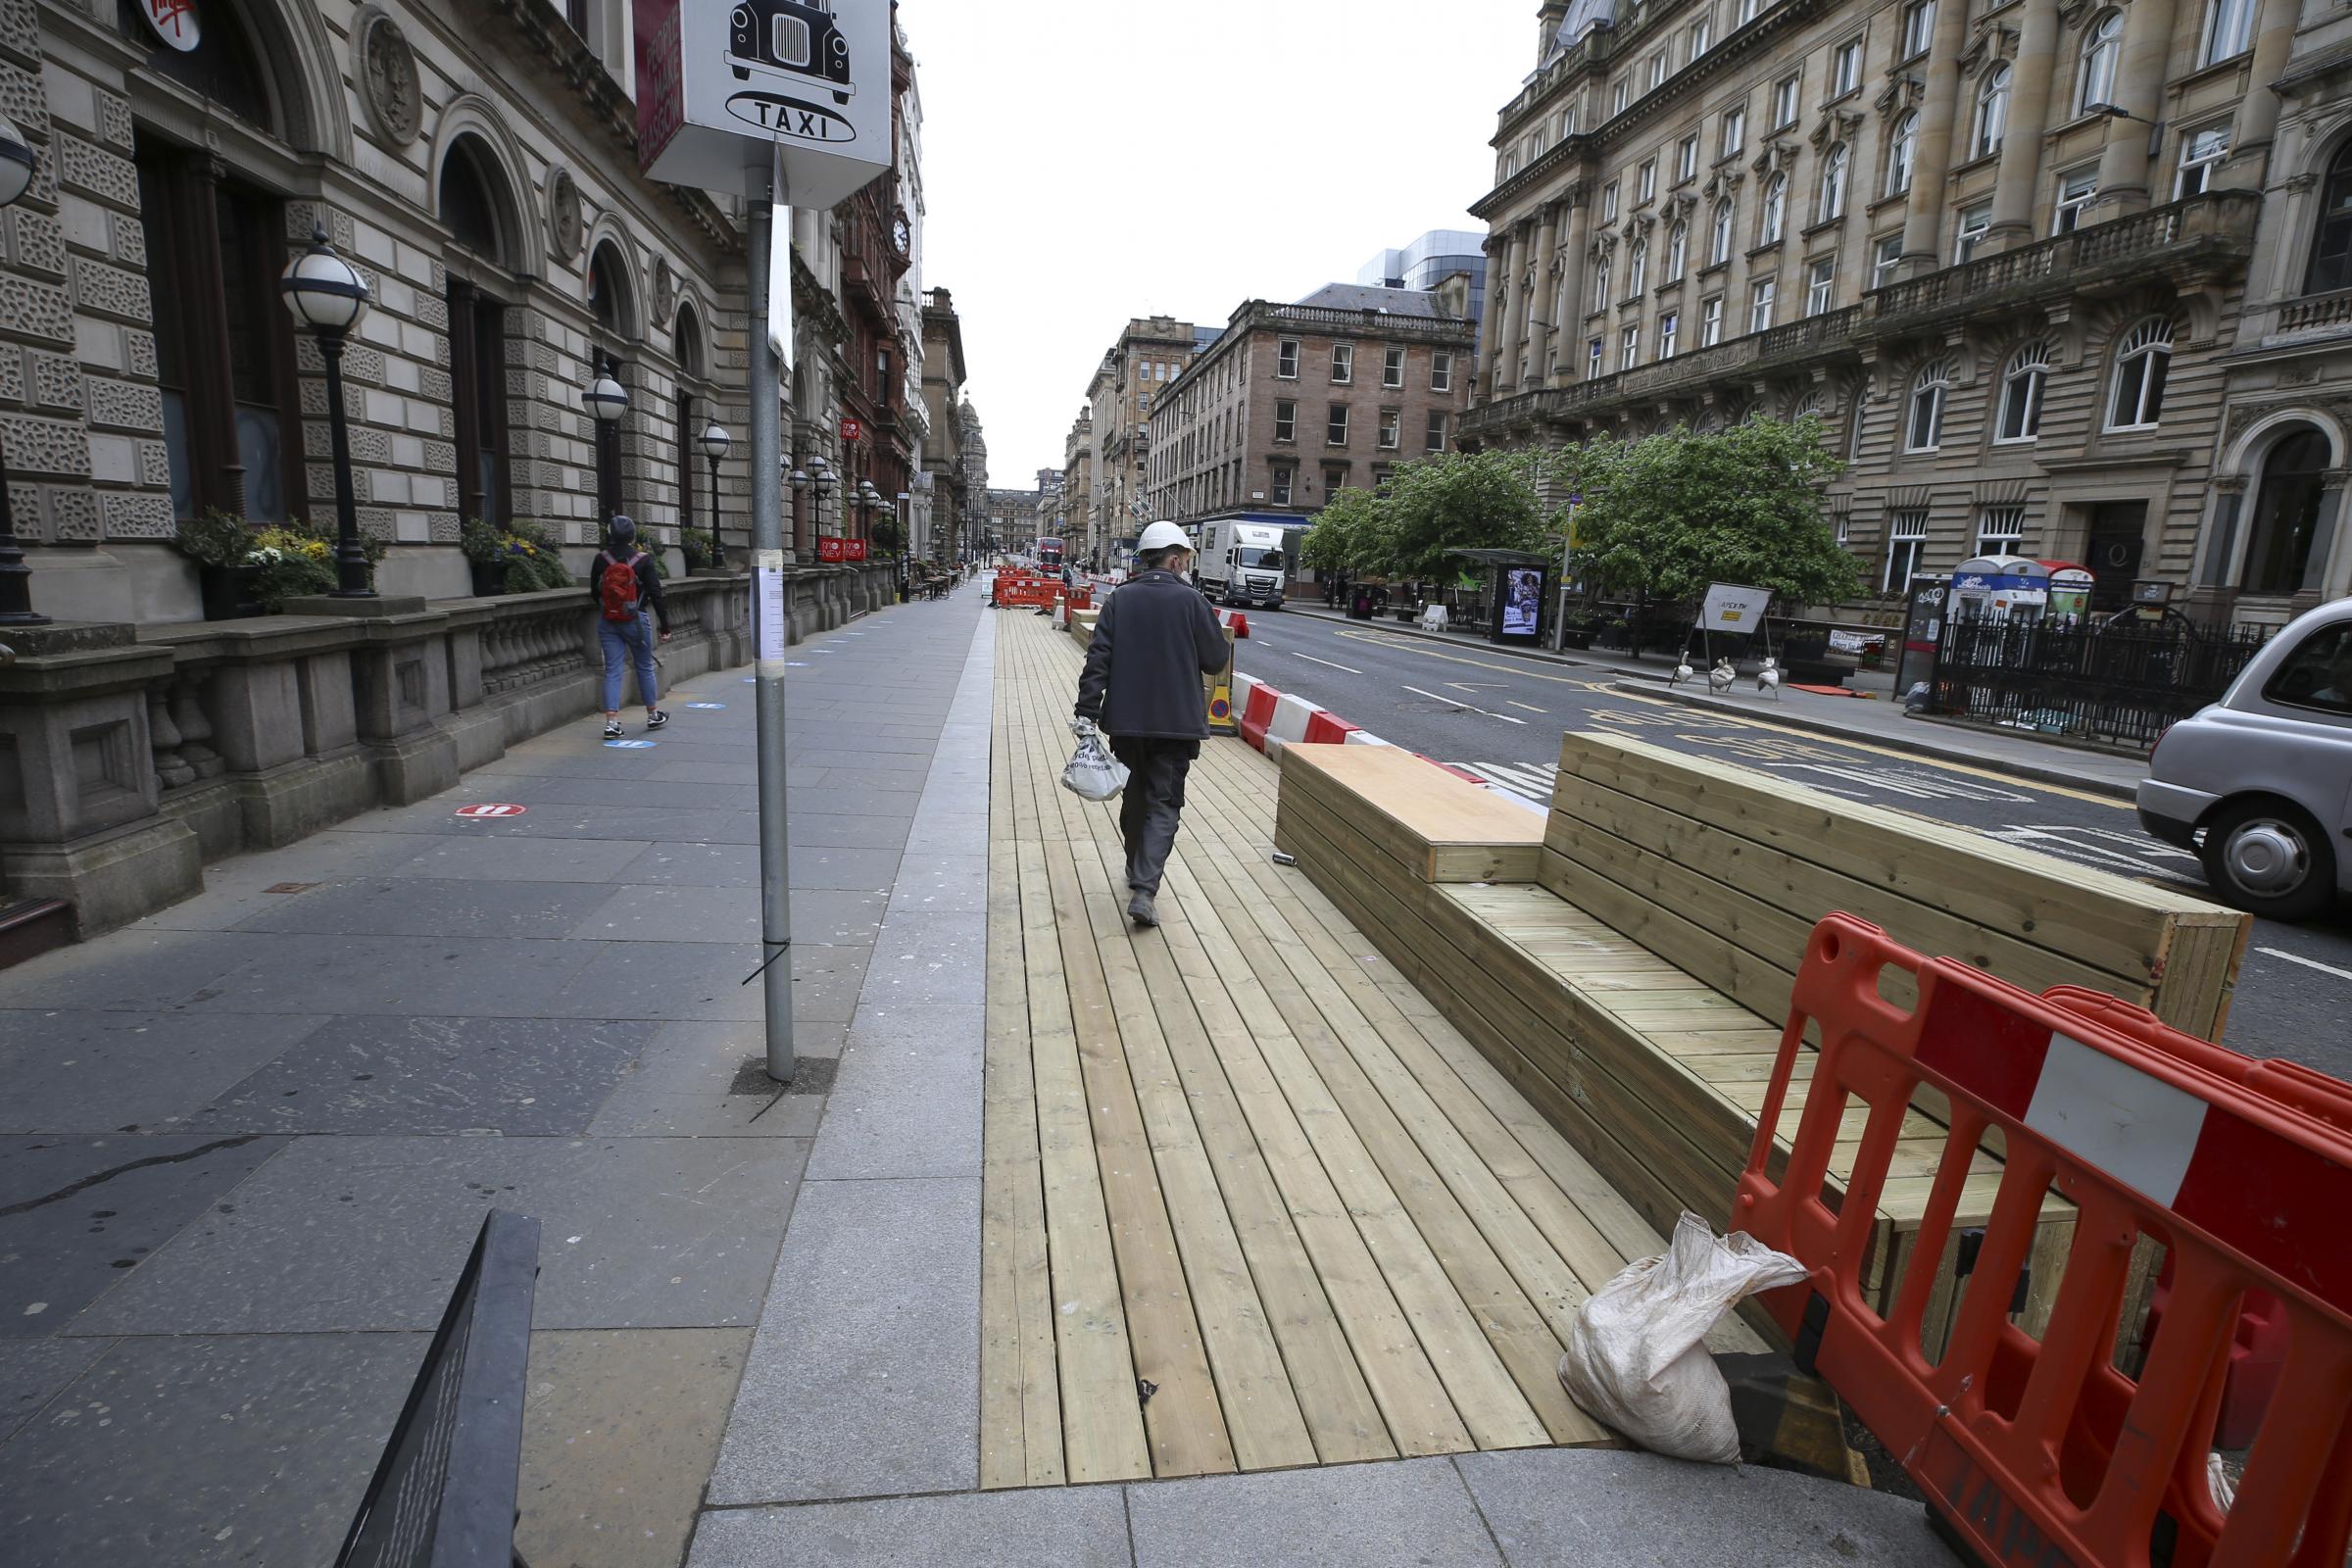 Decking and wooden seating built along St Vincent Place in Glasgow as part of the Spaces for People initiative